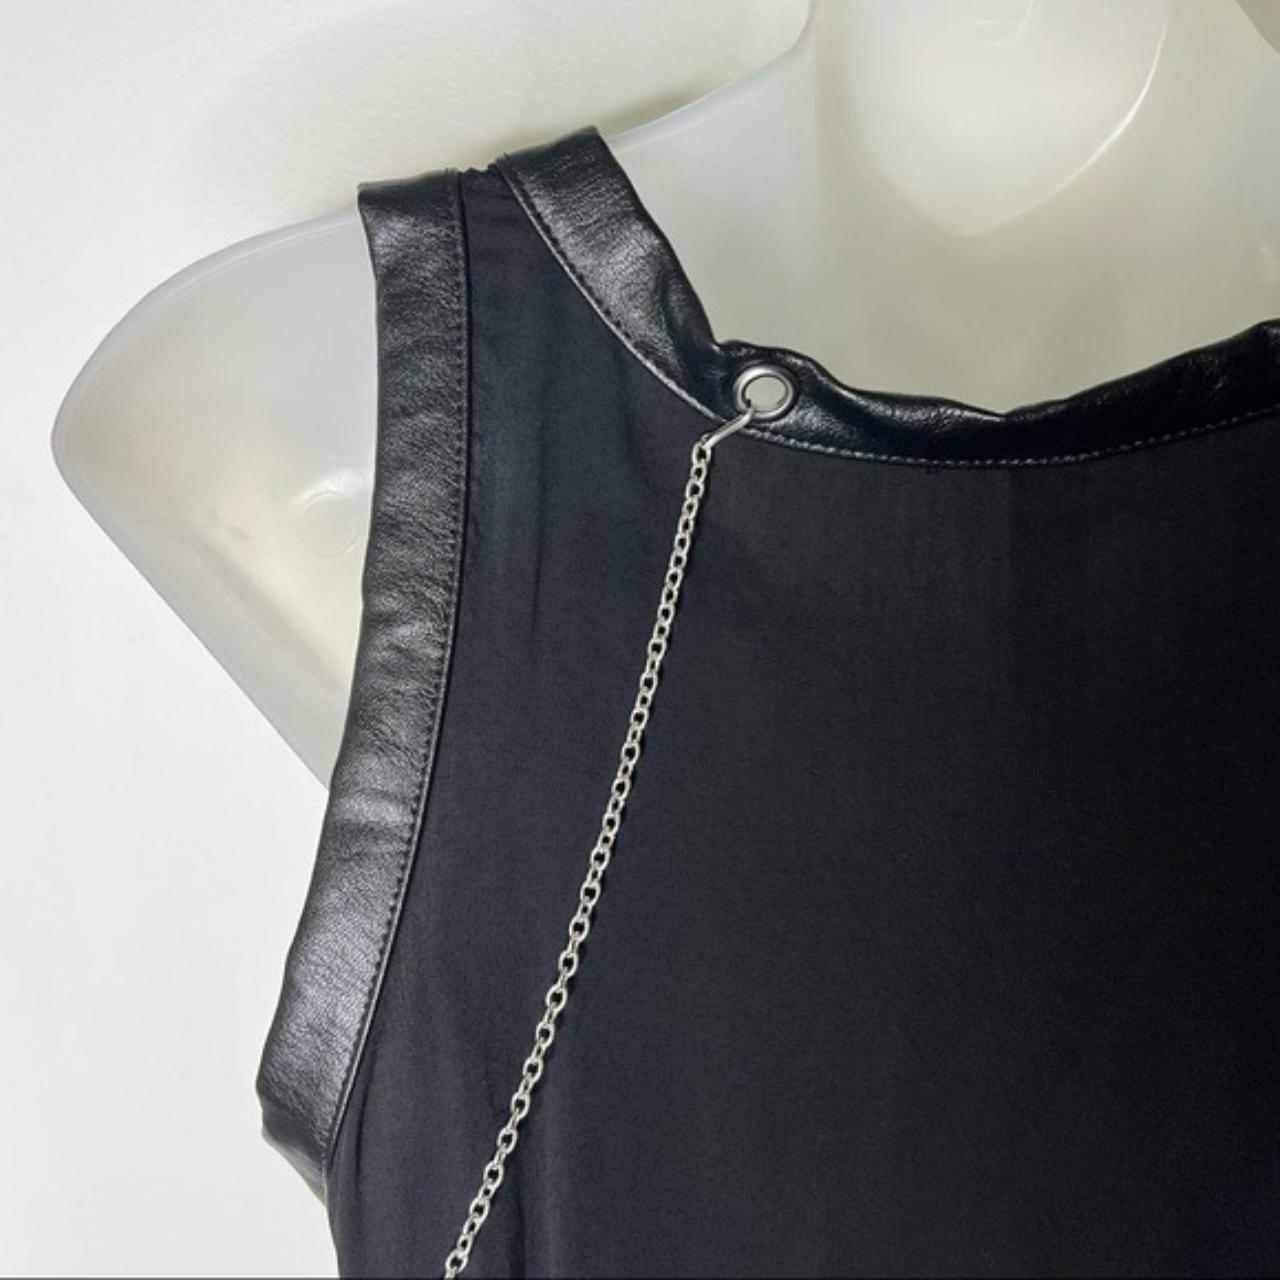 Product Image 4 - Disturbia 
Black top with chain